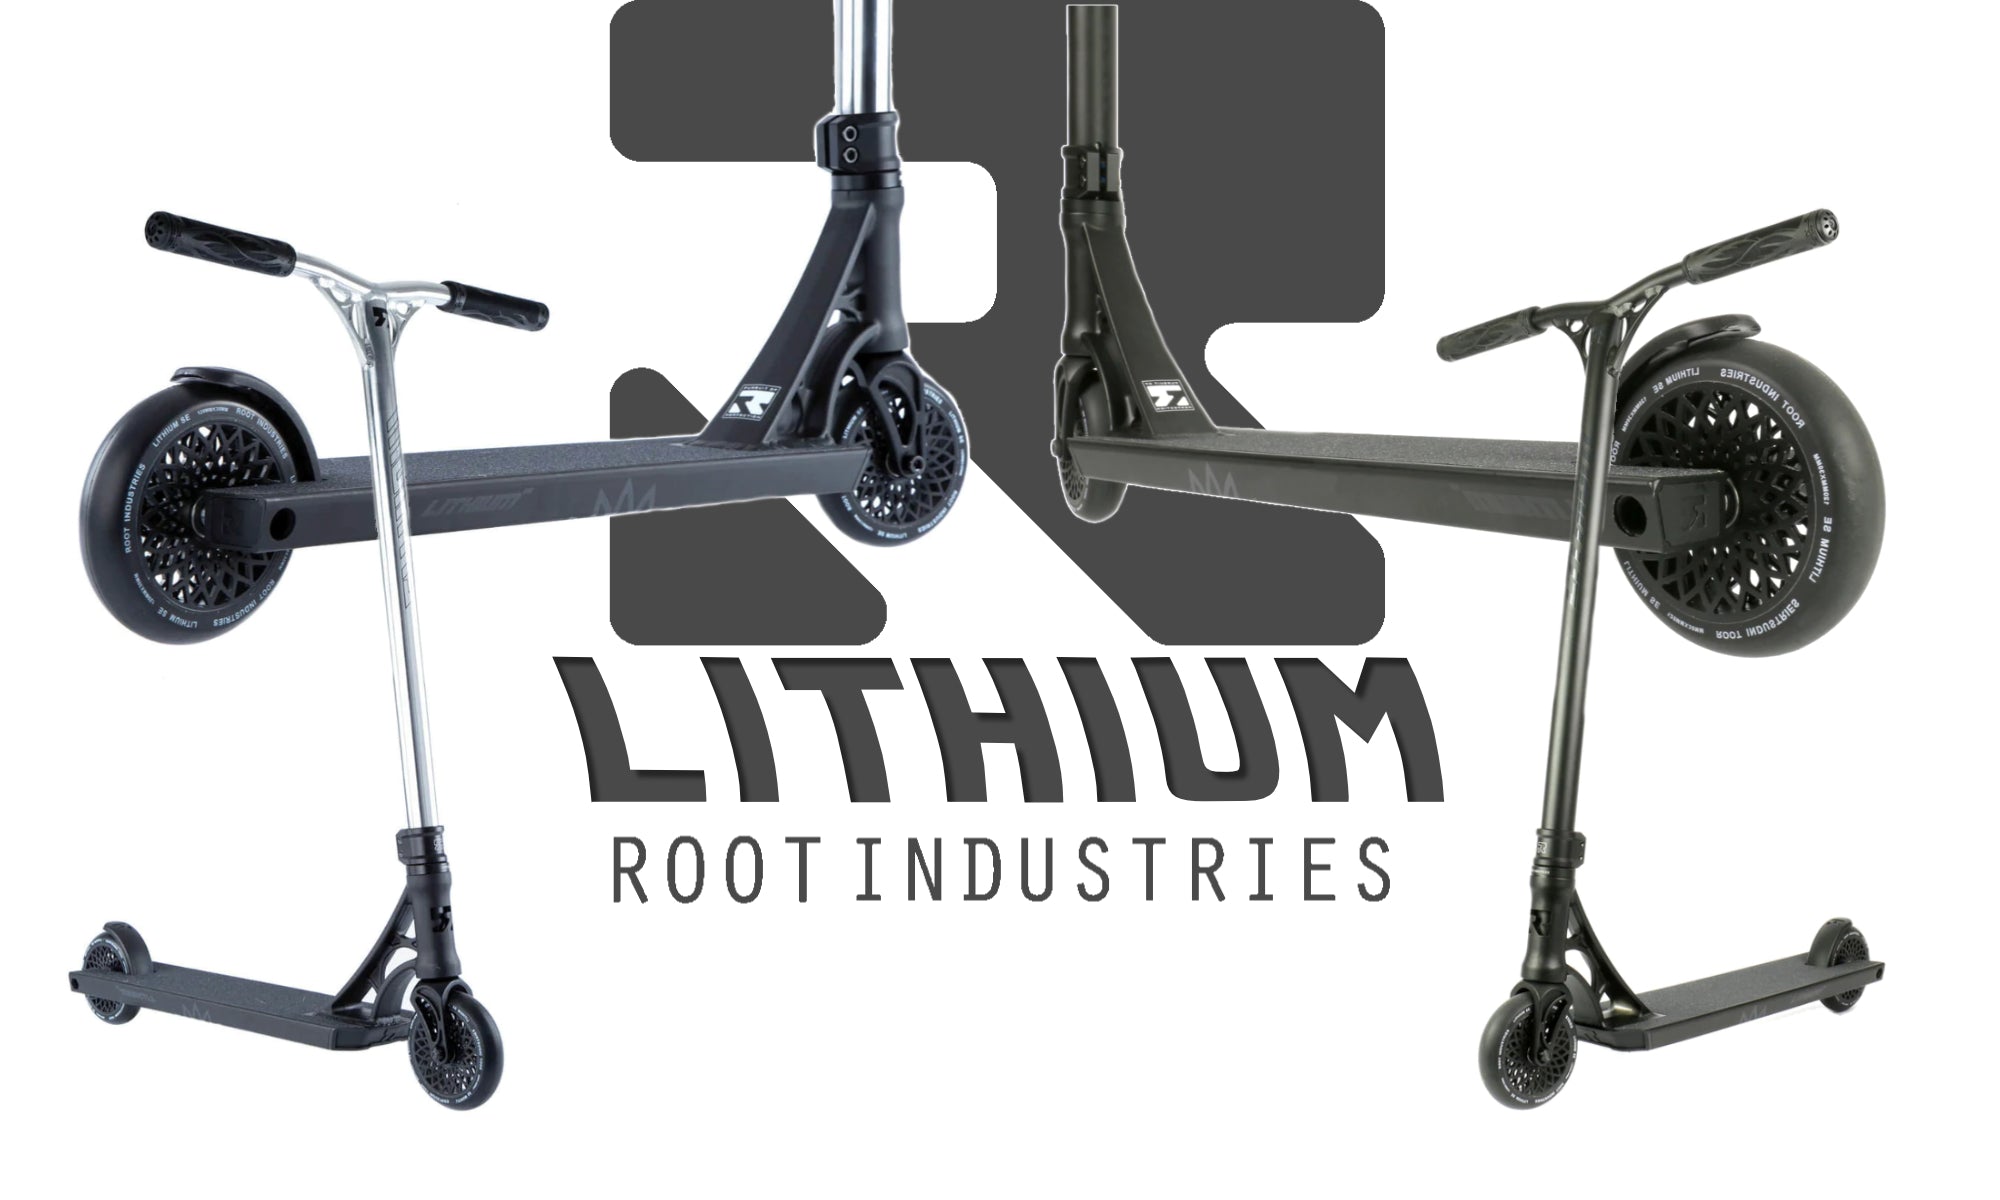 The Root Industries Lithium Lotus SE Complete Freestyle scooter is the best hybrid scooter on the market for its incredible price and quality.